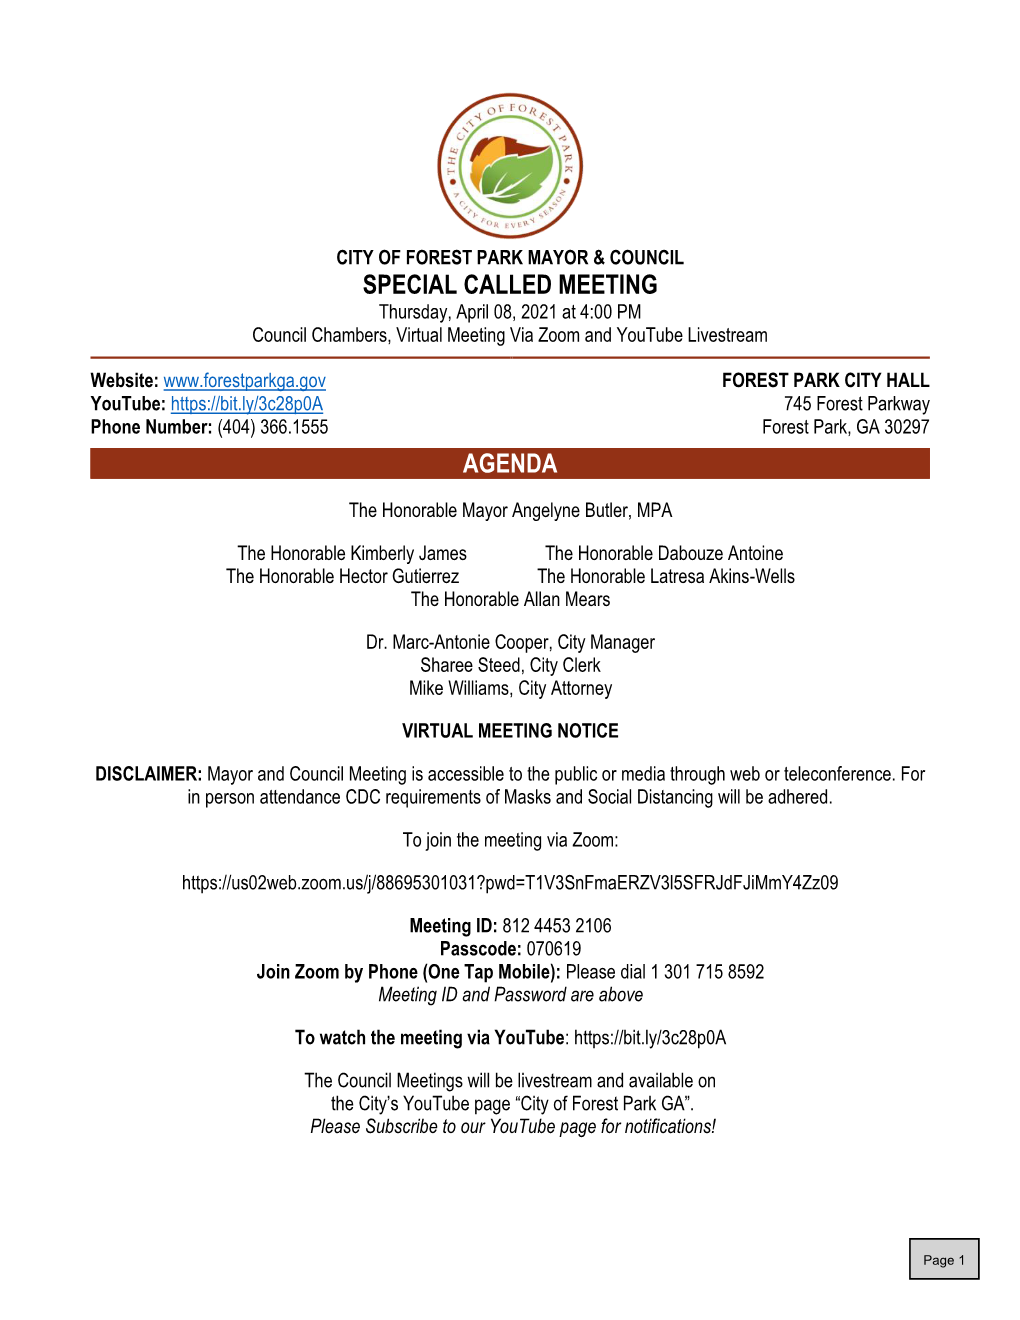 Special Called Meeting Agenda 4/8/2021